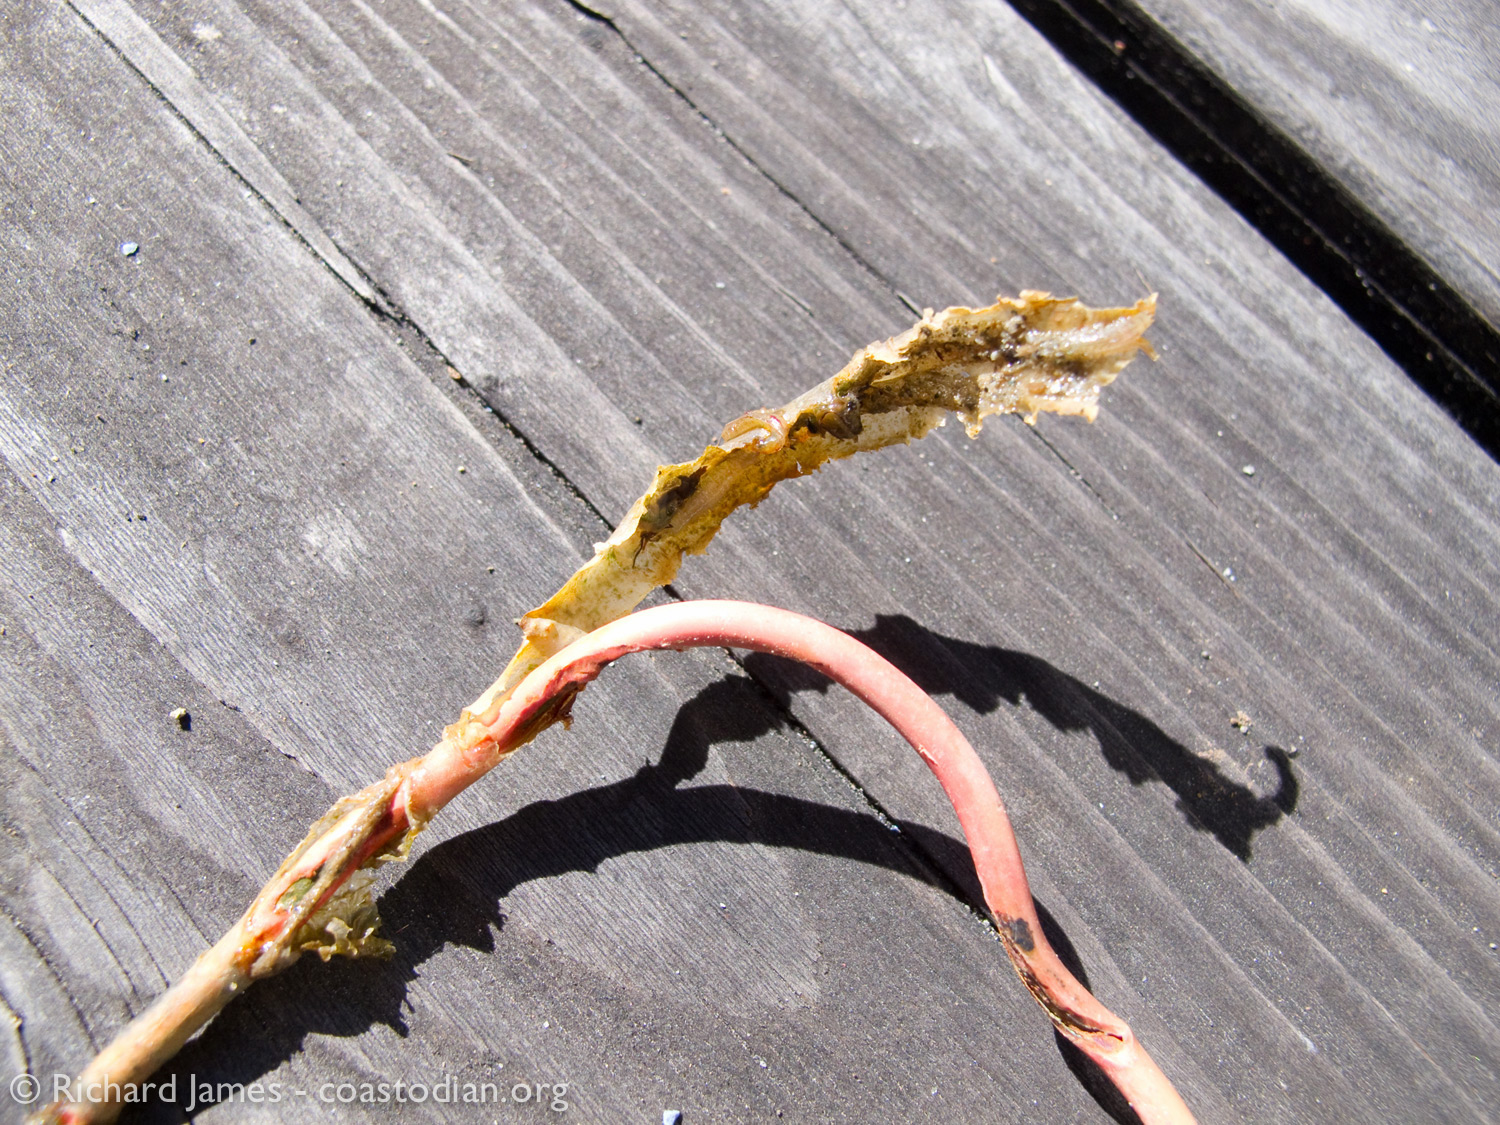 deteriorating plastic-coated copper wire recovered from Point Reyes Oyster Company lease